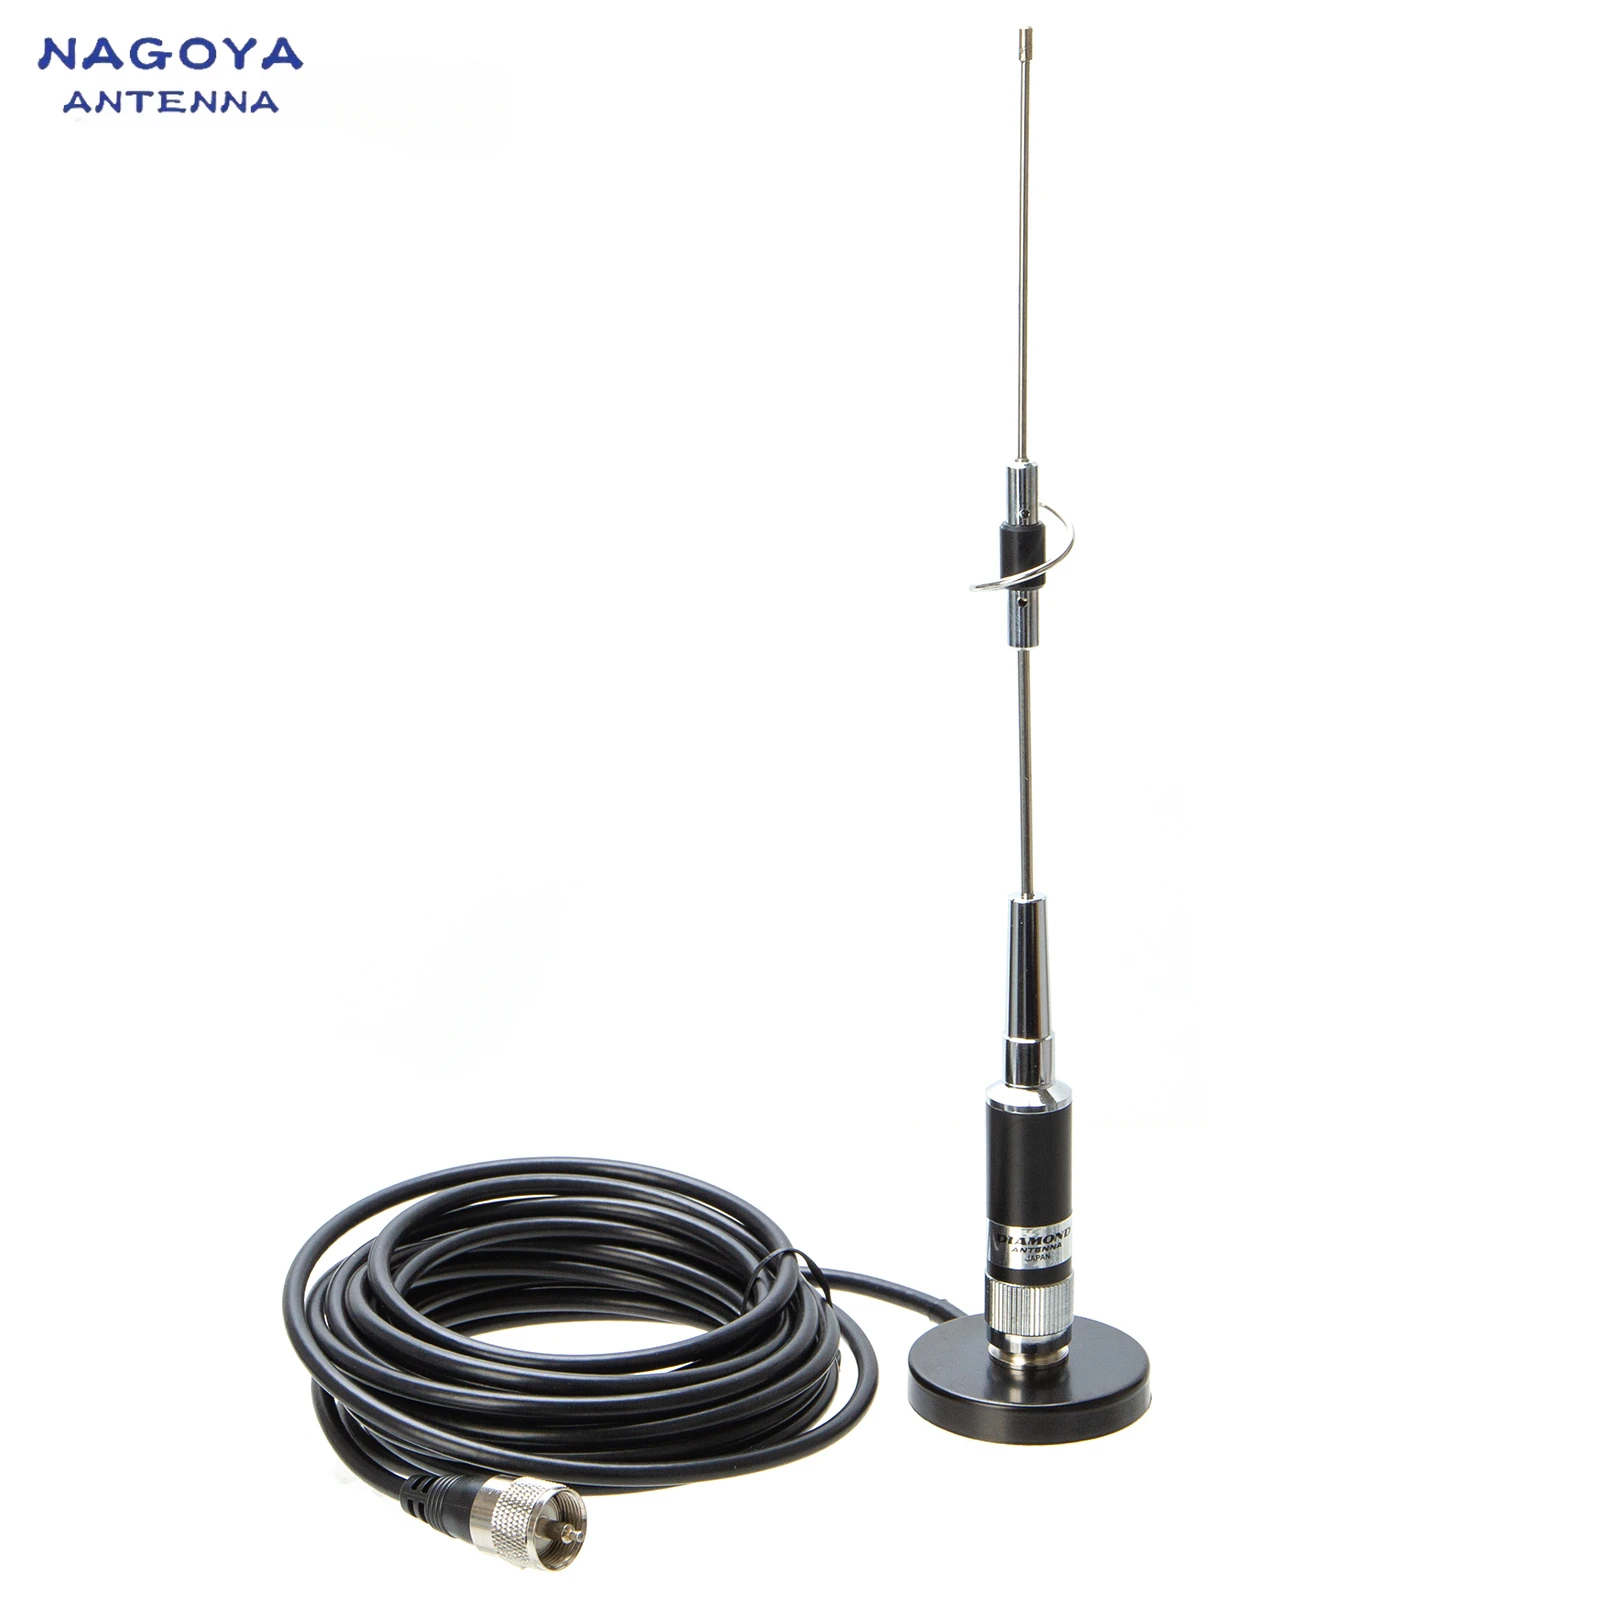 

CR-77 144/430Mhz Wide Band Antenna with MB60 PL259 5M UHF Male Car Mobile Antenna Coax Cable MINI Magnetic Base For ham